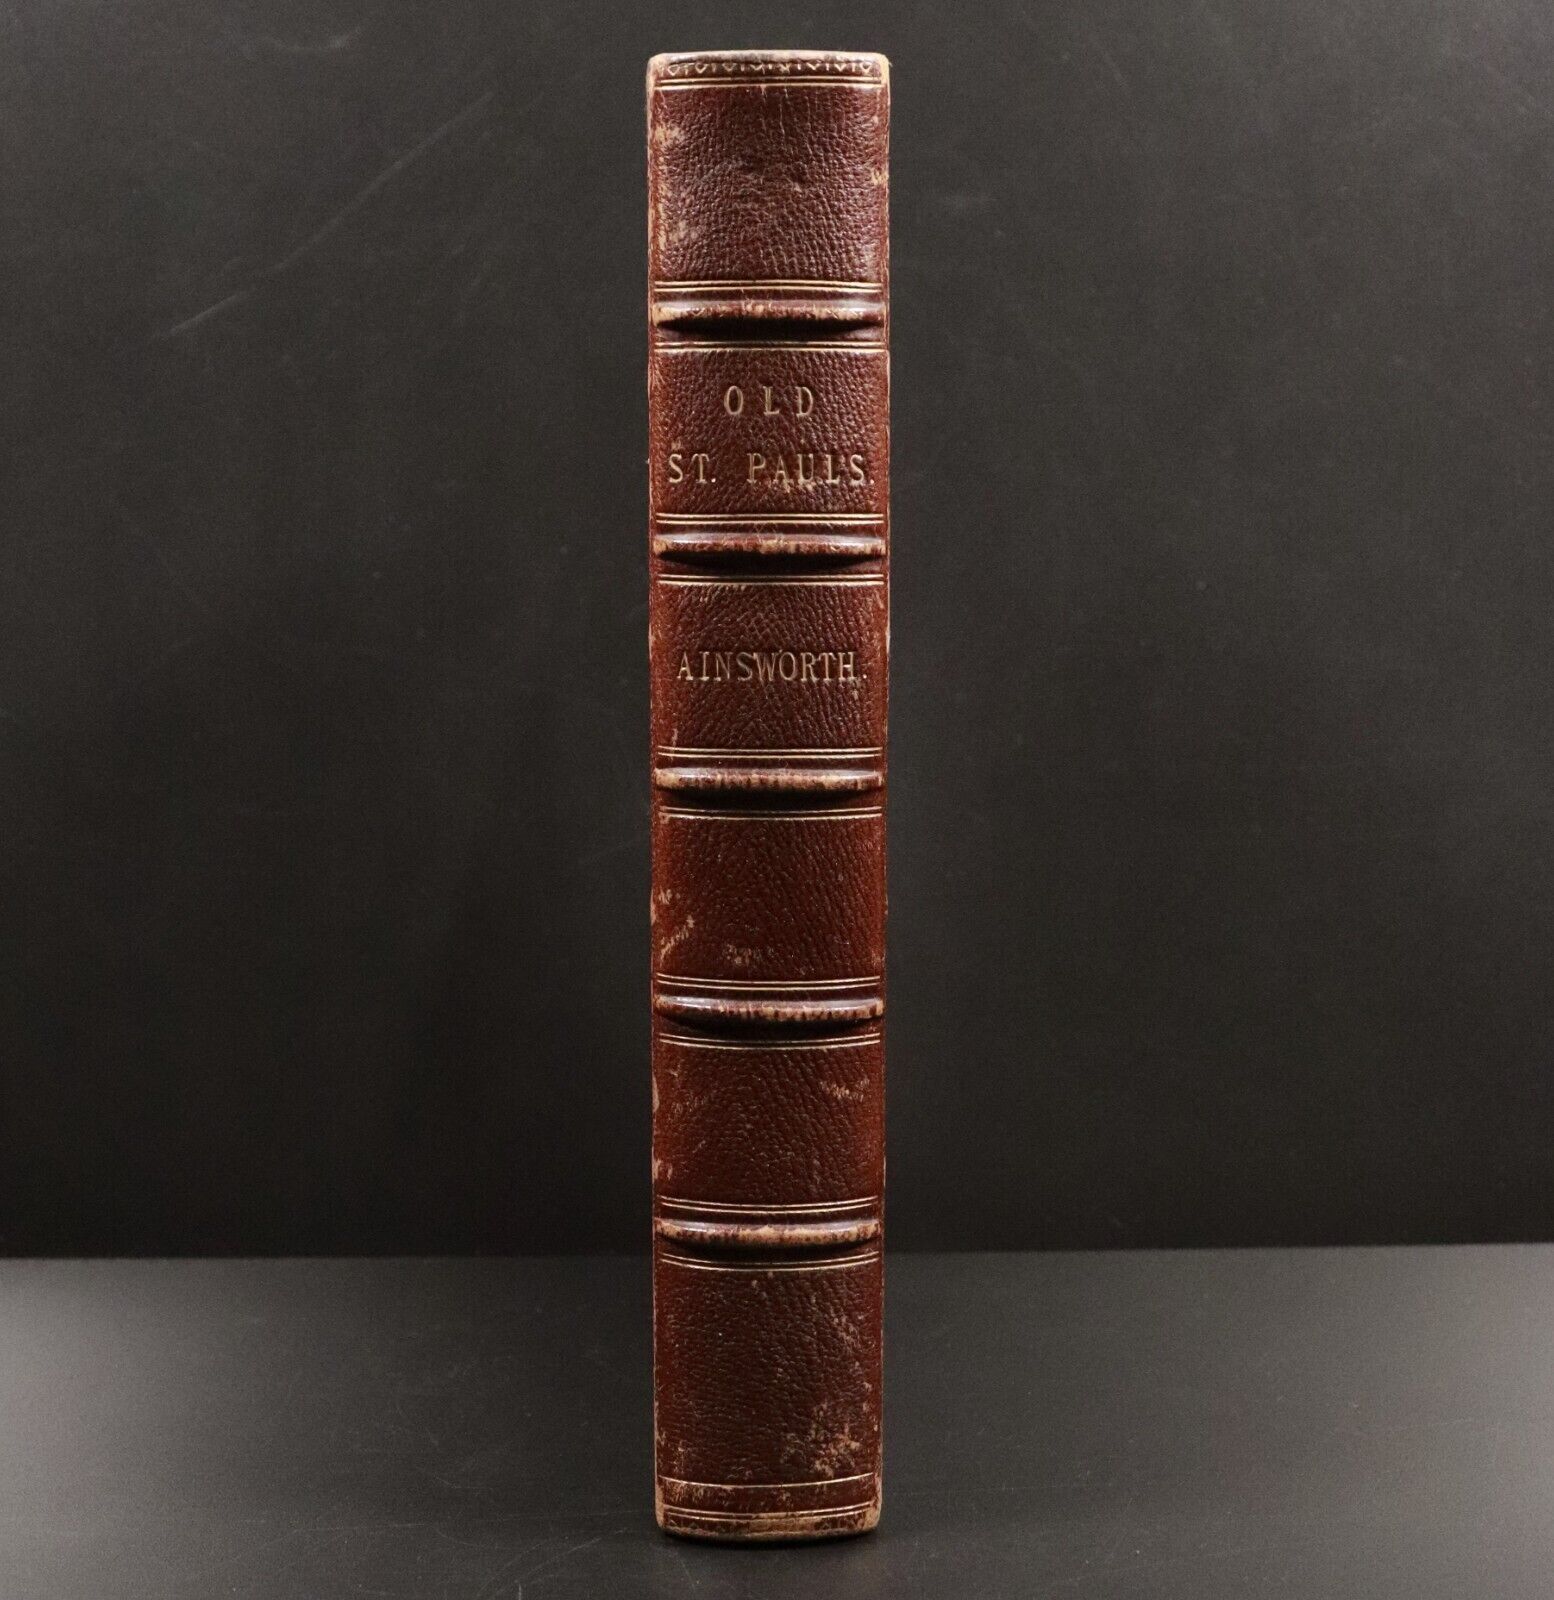 1847 Old Saint Paul's: Plague & Fire by WH Ainsworth Historical Romance Book